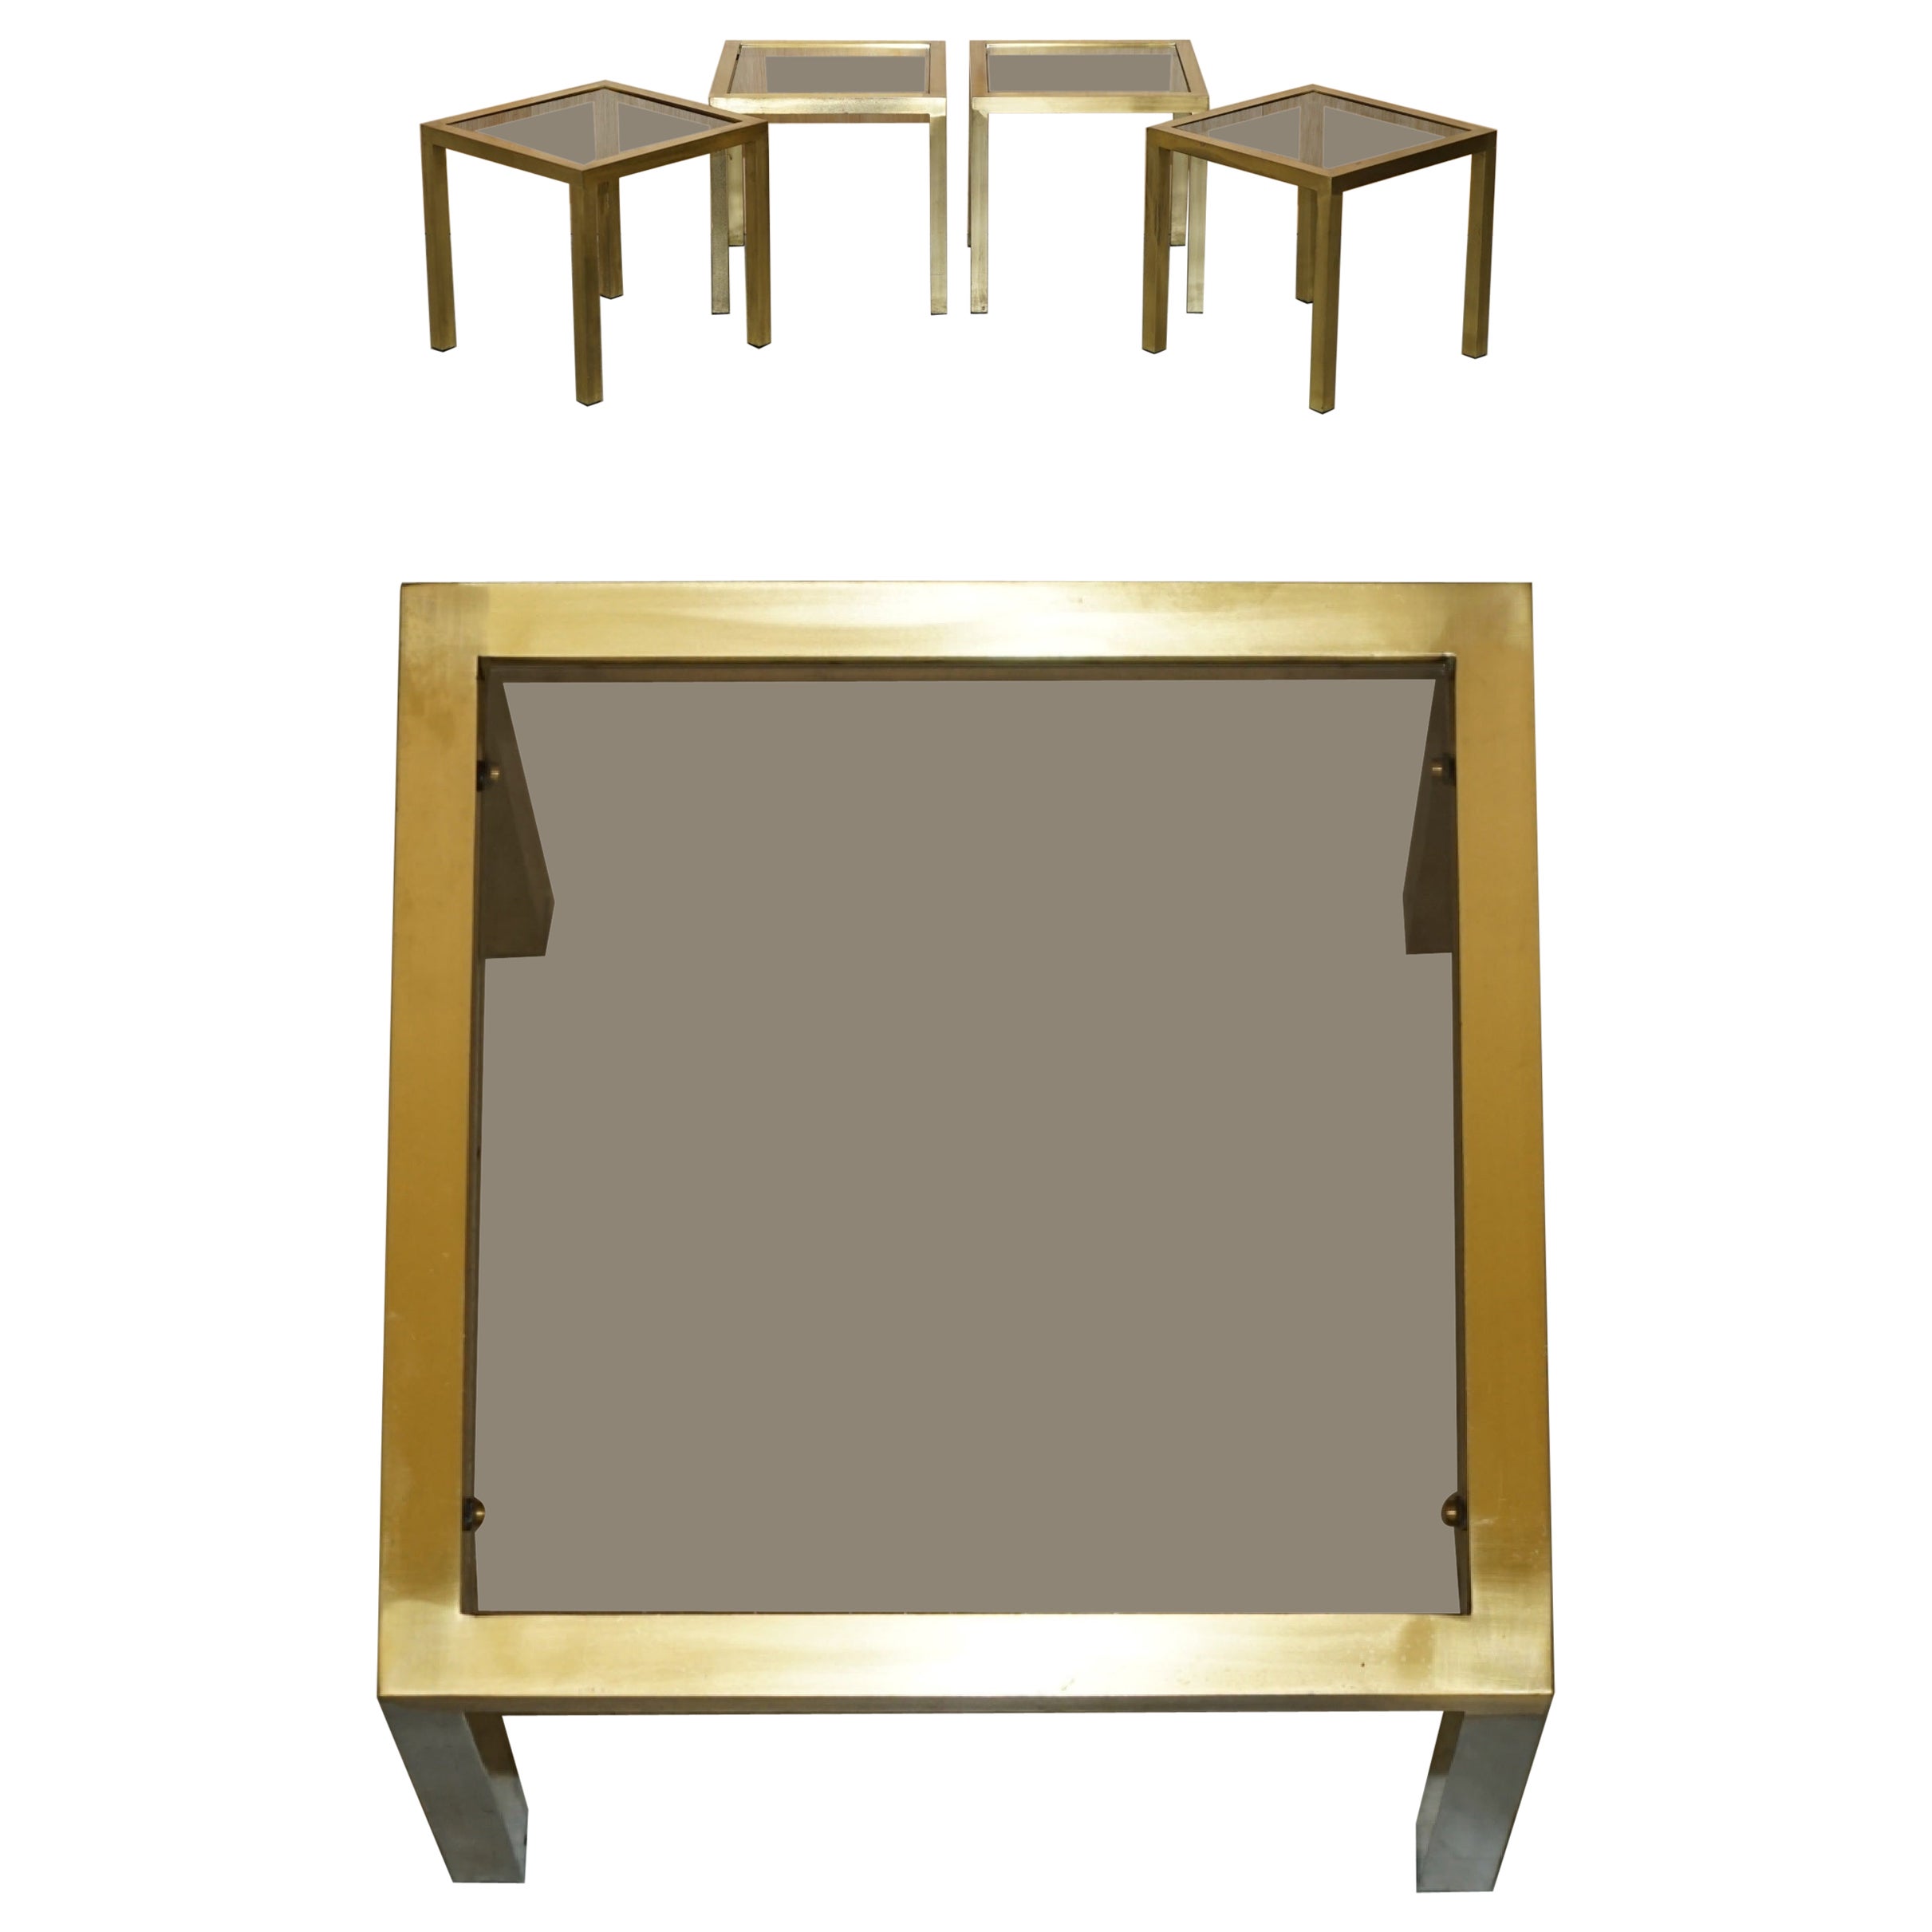 FOUR MID CENTURY MODERN MAISON JANSEN PARIS STYLE BRASS SMOKED GLASS SiDE TABLES For Sale